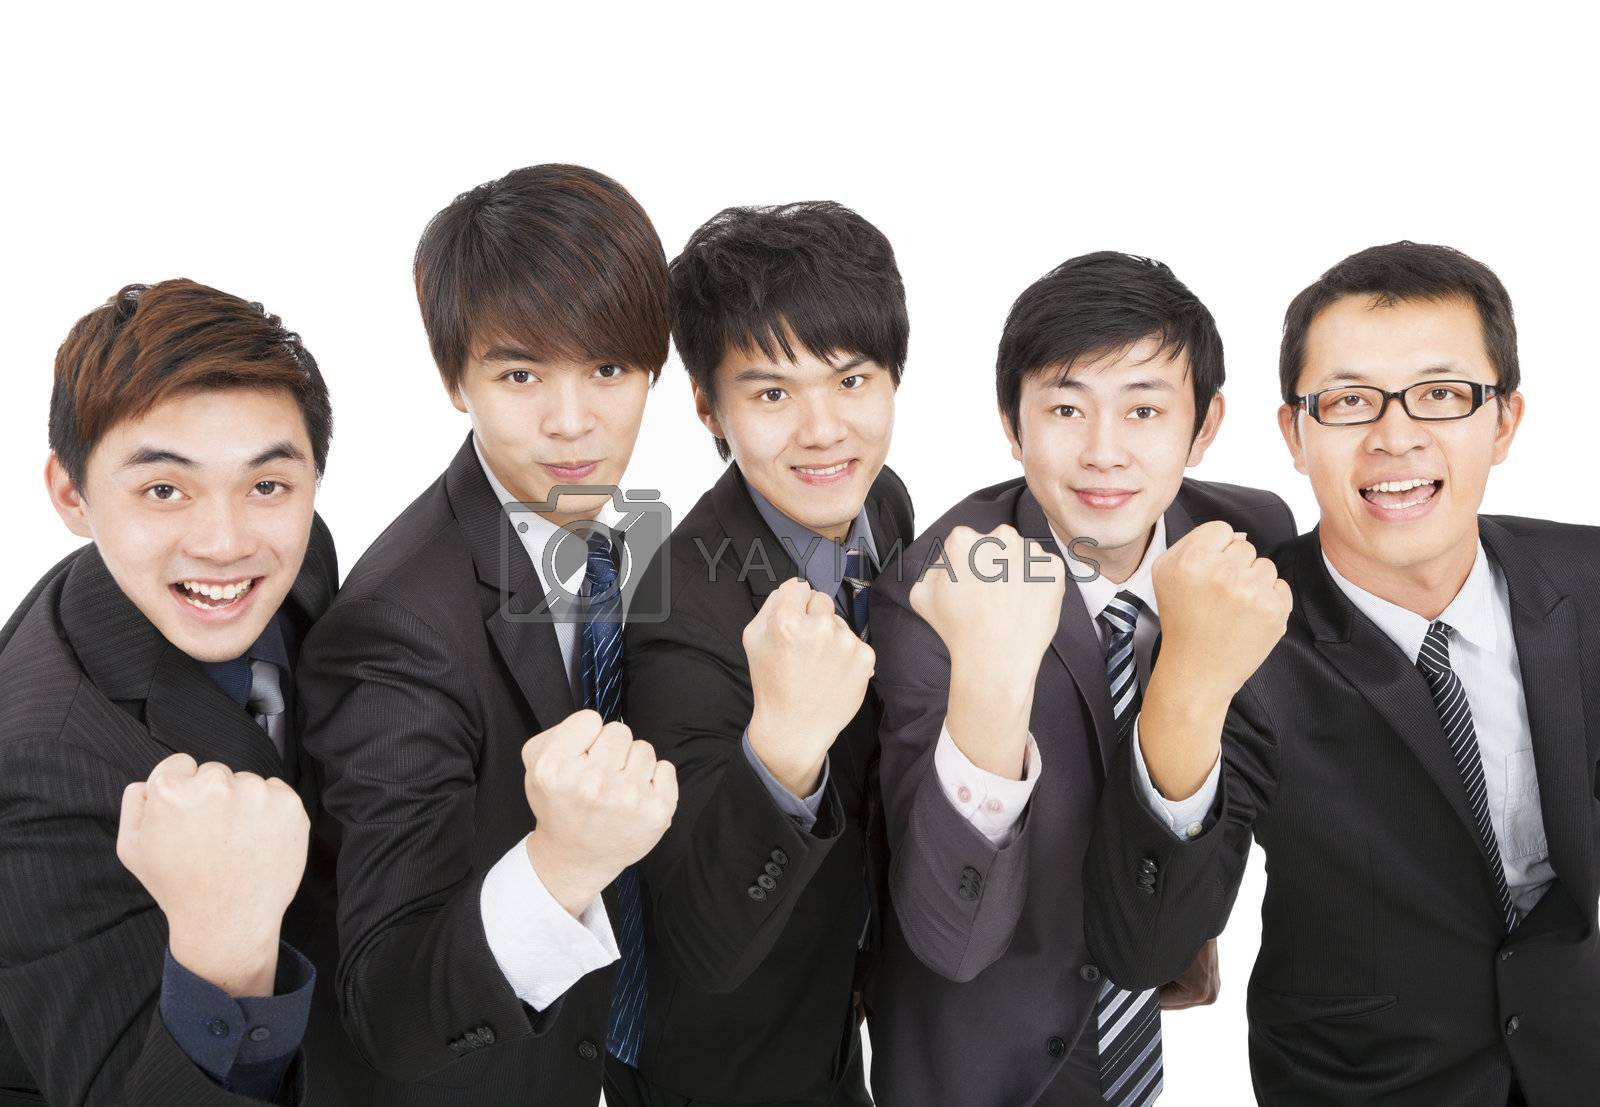 Royalty free image of happy asian business team with success gesture by tomwang